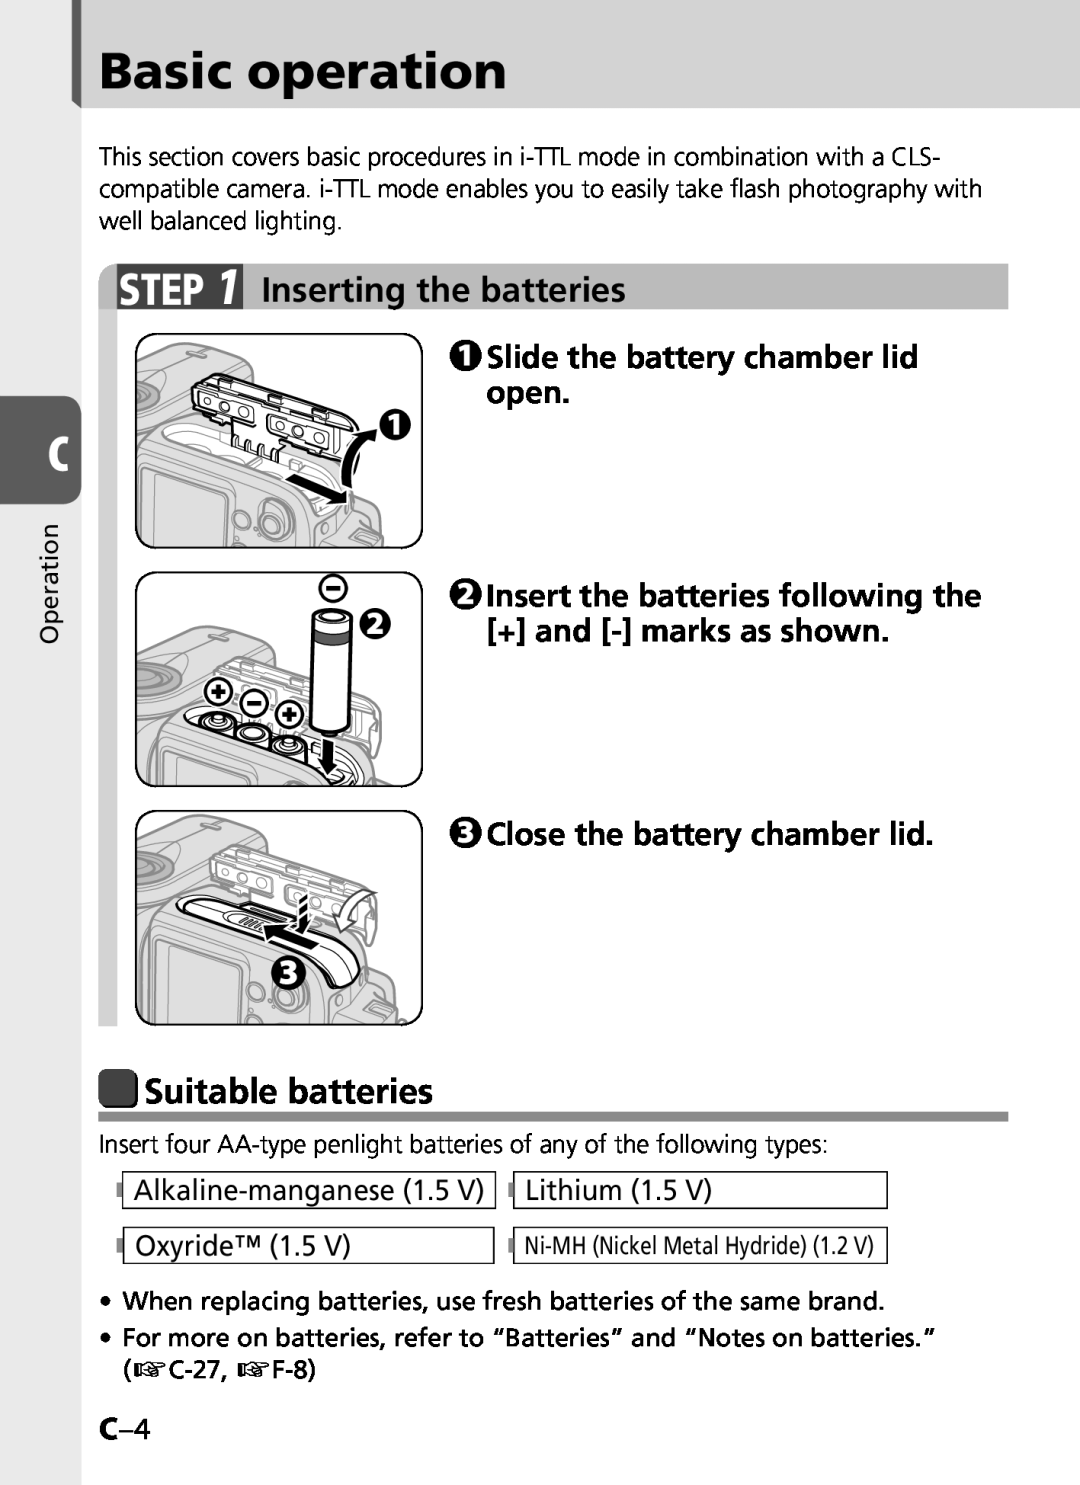 Univex SB-900 user manual Basic operation, Inserting the batteries, Suitable batteries, Slide the battery chamber lid open 